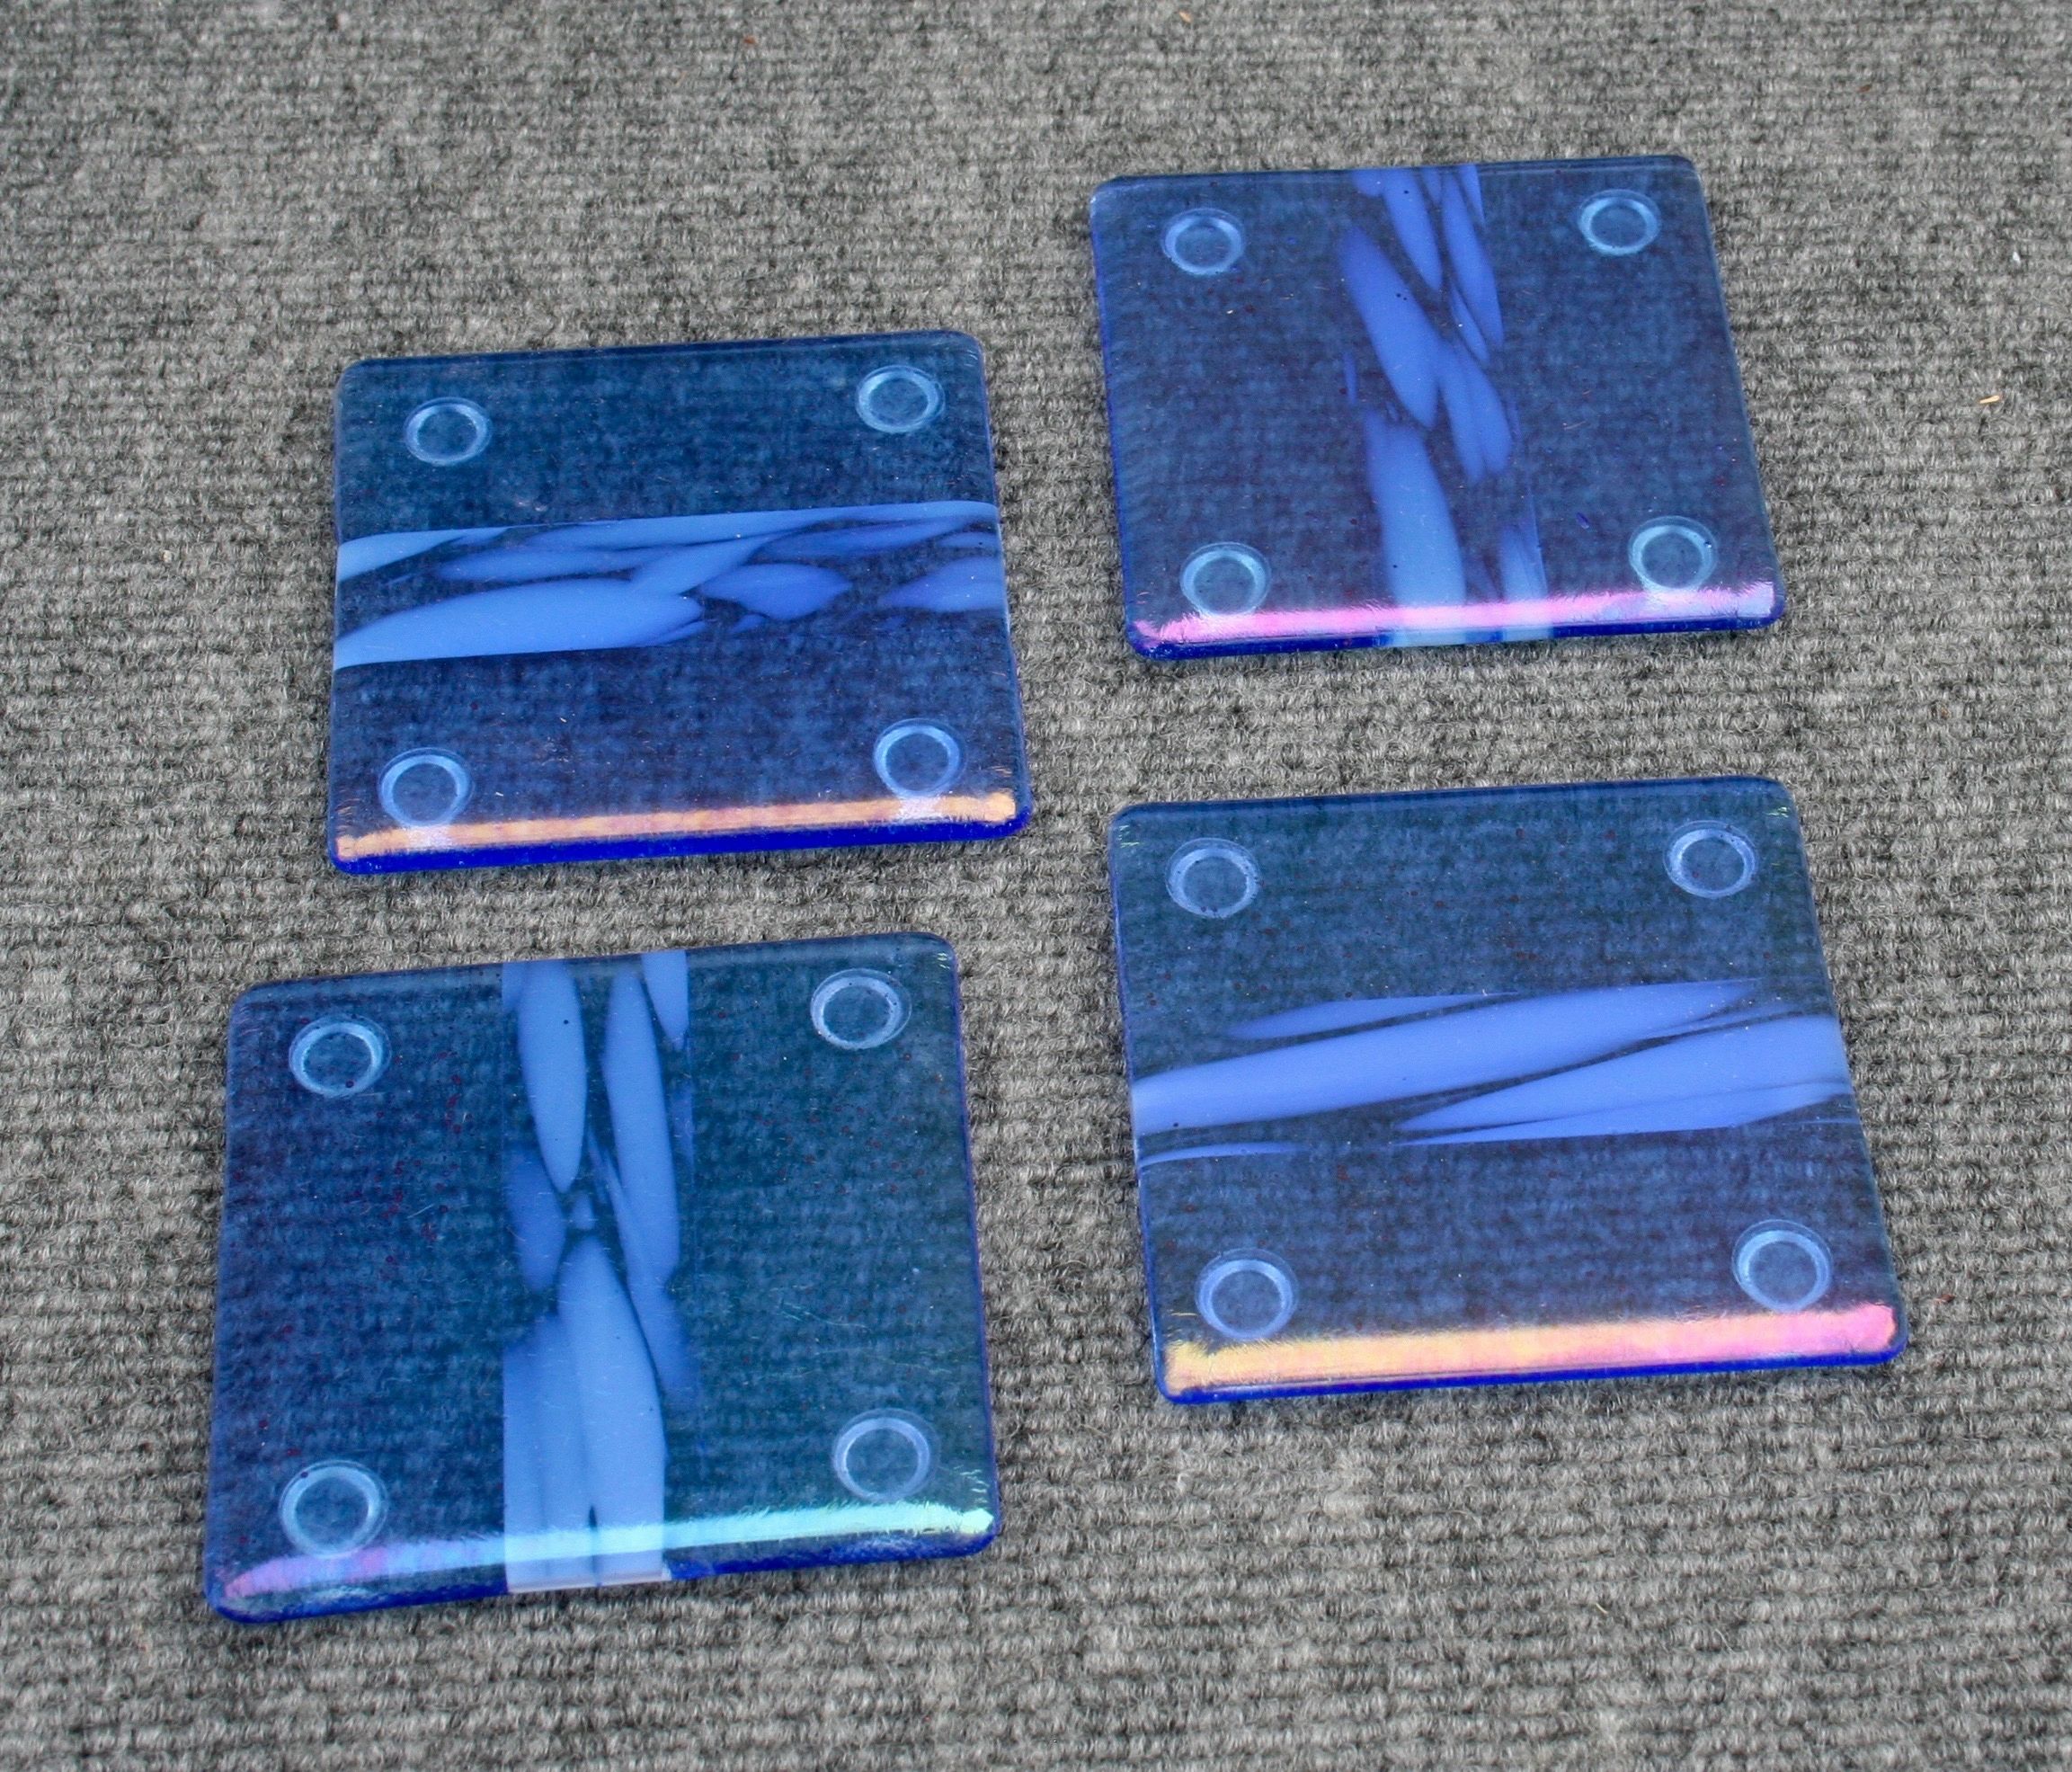 Glass Coasters in many different colors and designs